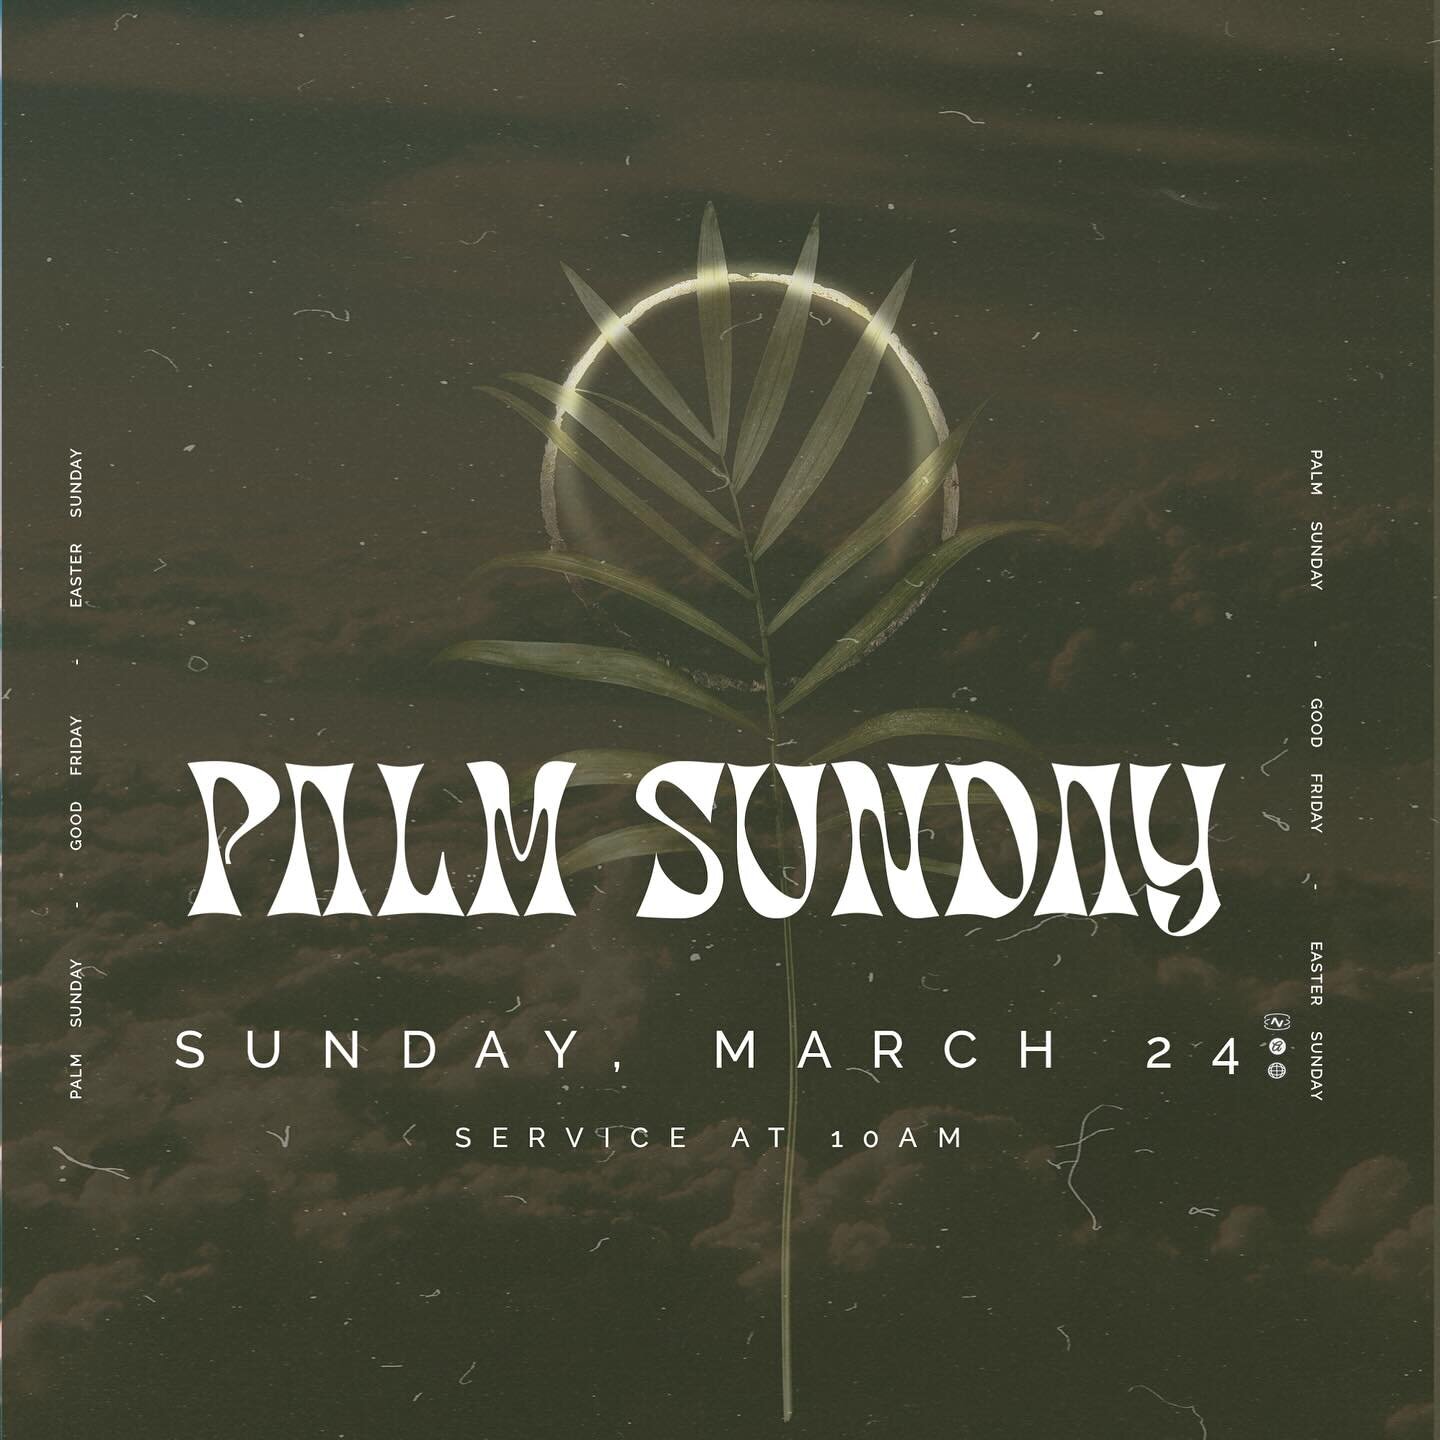 Holy Week kicks off with our Palm Sunday service this Sunday at 10AM.  We&rsquo;ll worship with palm branches in hand as we remember Jesus&rsquo; triumphant entry into Jerusalem.

TENEBRAE - GOOD FRIDAY SERVICE
March 29 at 7PM

The Tenebrae service i